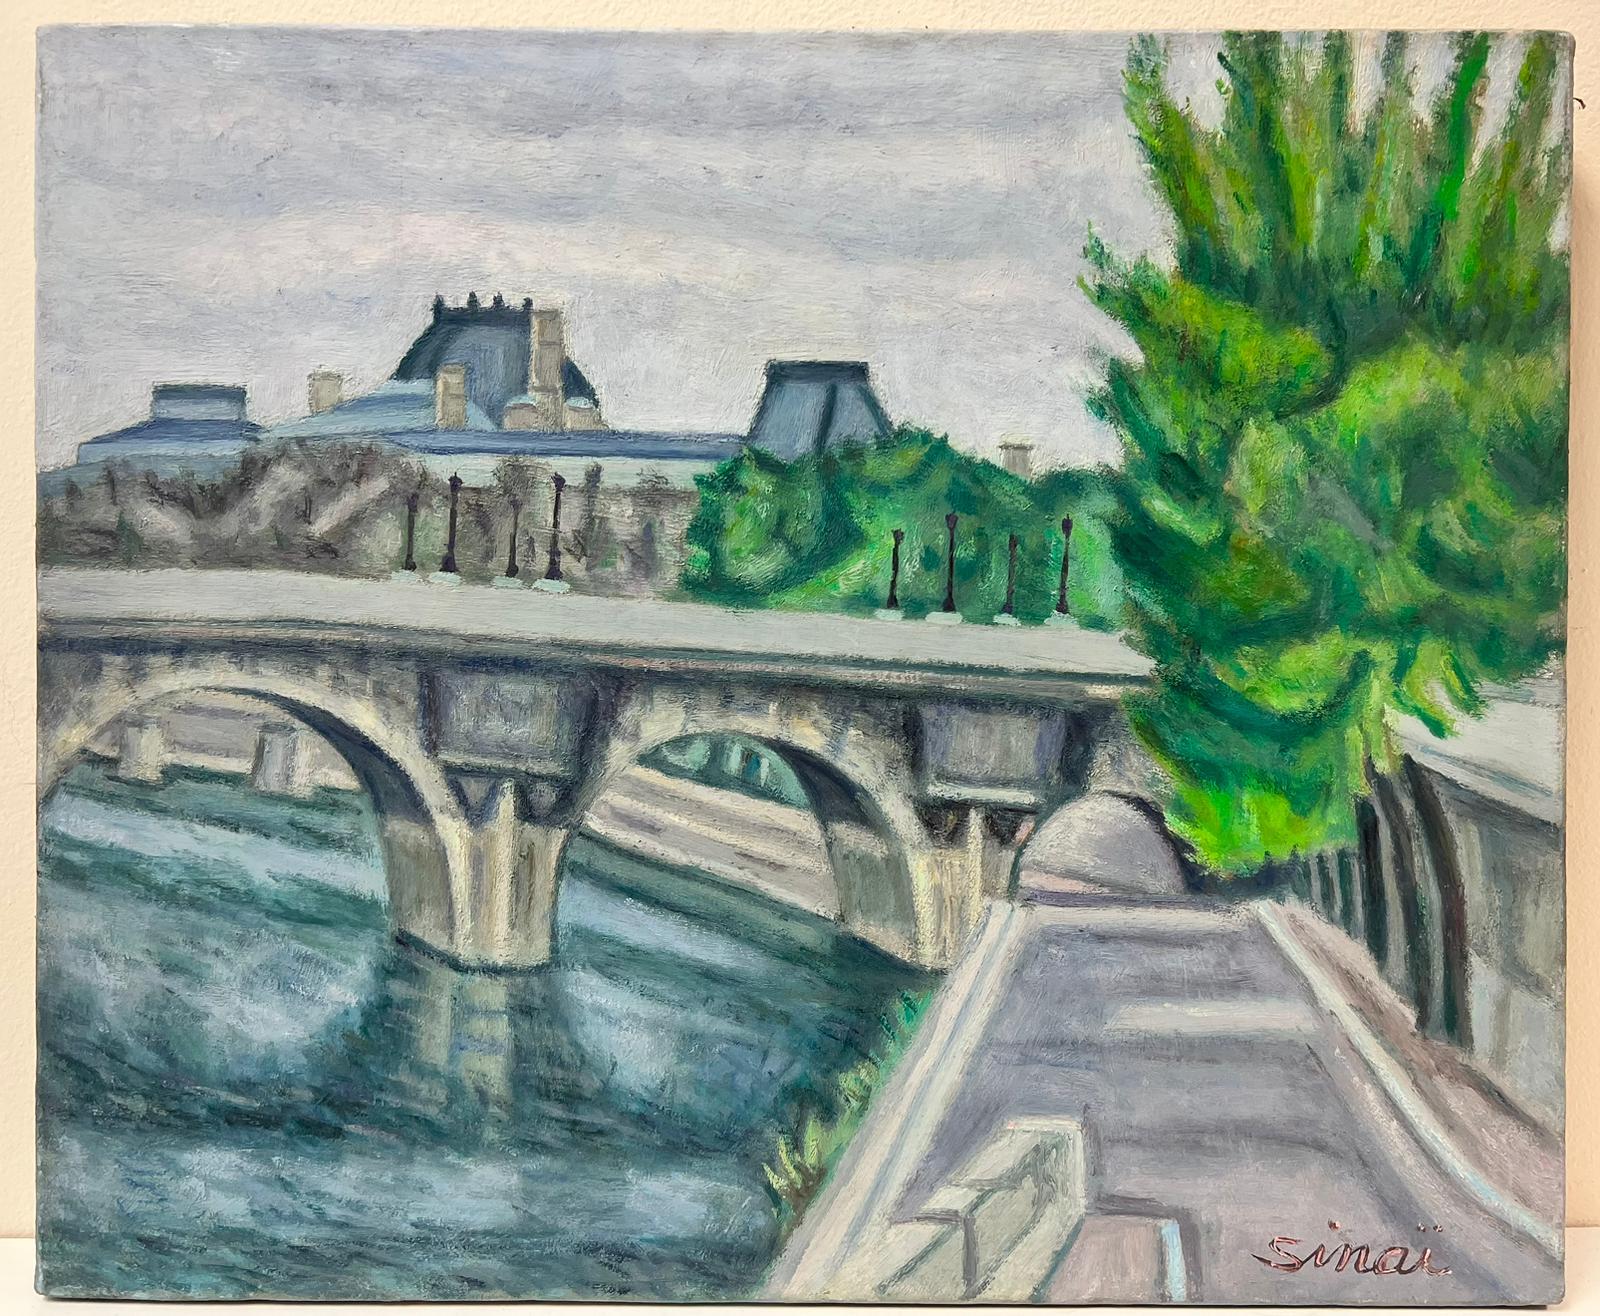 Paris, The River Seine
French School, late 20th century
signed
oil painting on canvas, unframed
canvas: 15 x 18 inches
provenance: private collection, France
condition: very good and sound condition 
